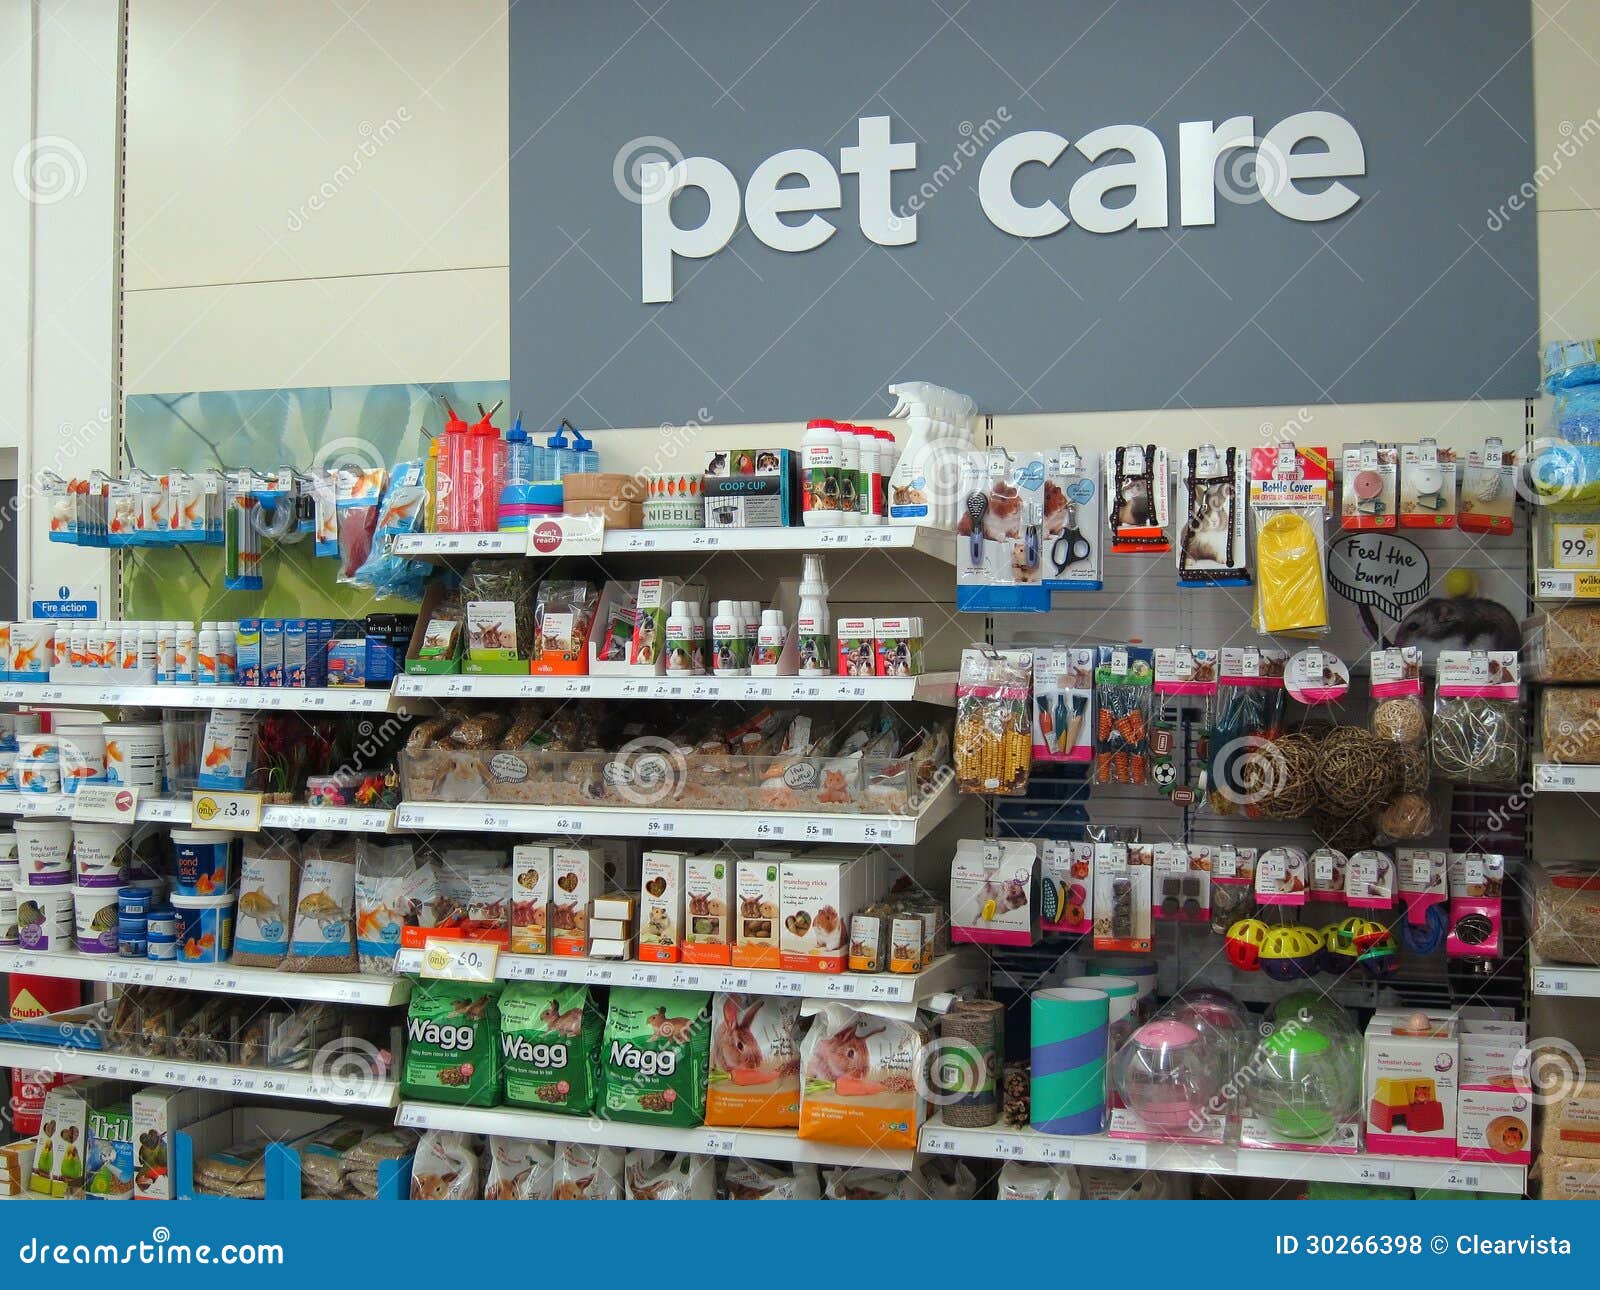 Pet care products. editorial stock photo. Image of ...